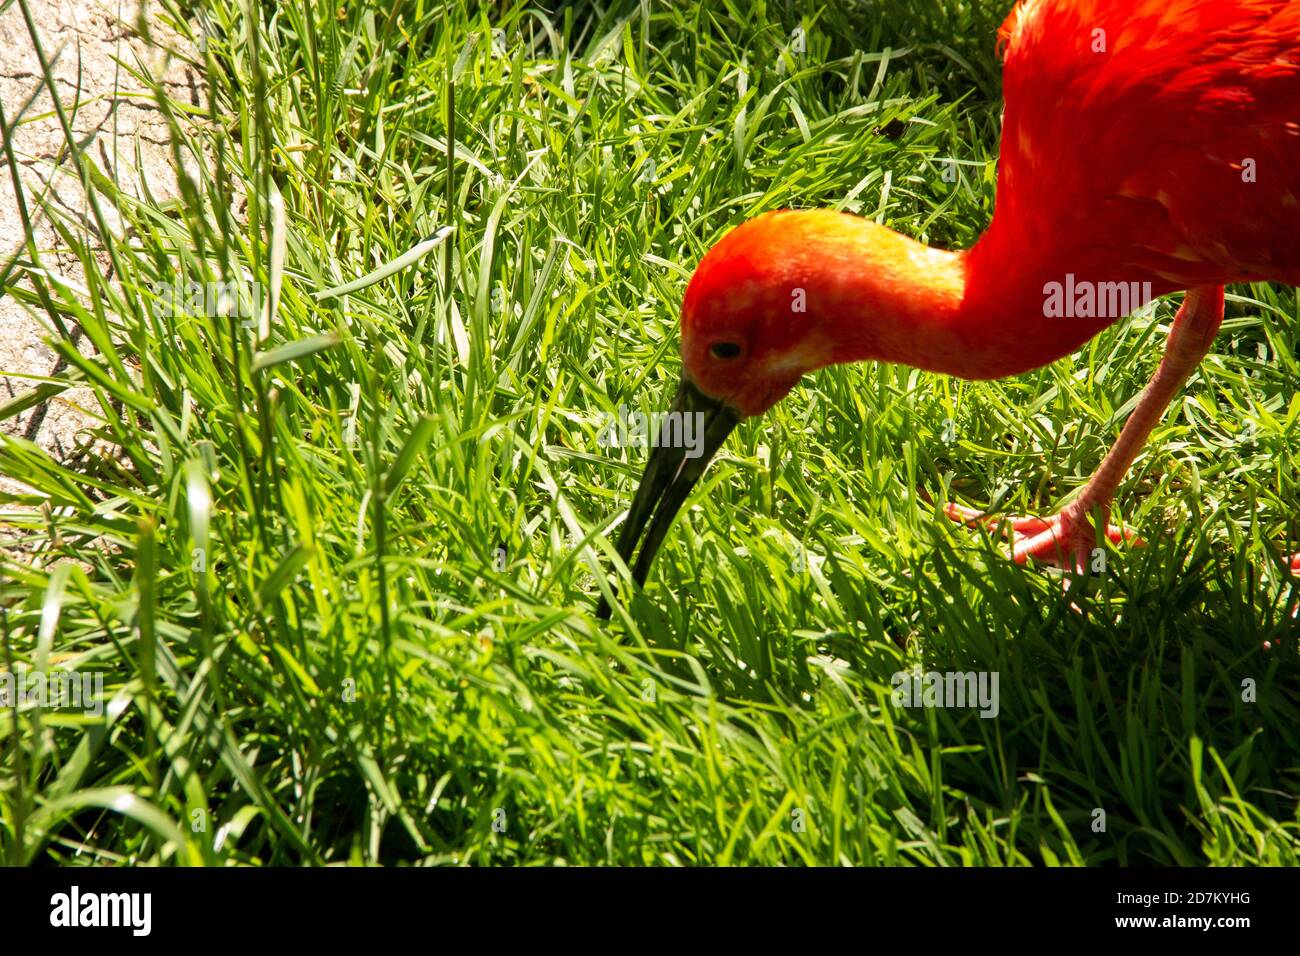 Head view of a scarlet ibis, Eudocimus ruber, is a species of ibis in the bird family Threskiornithidae Stock Photo